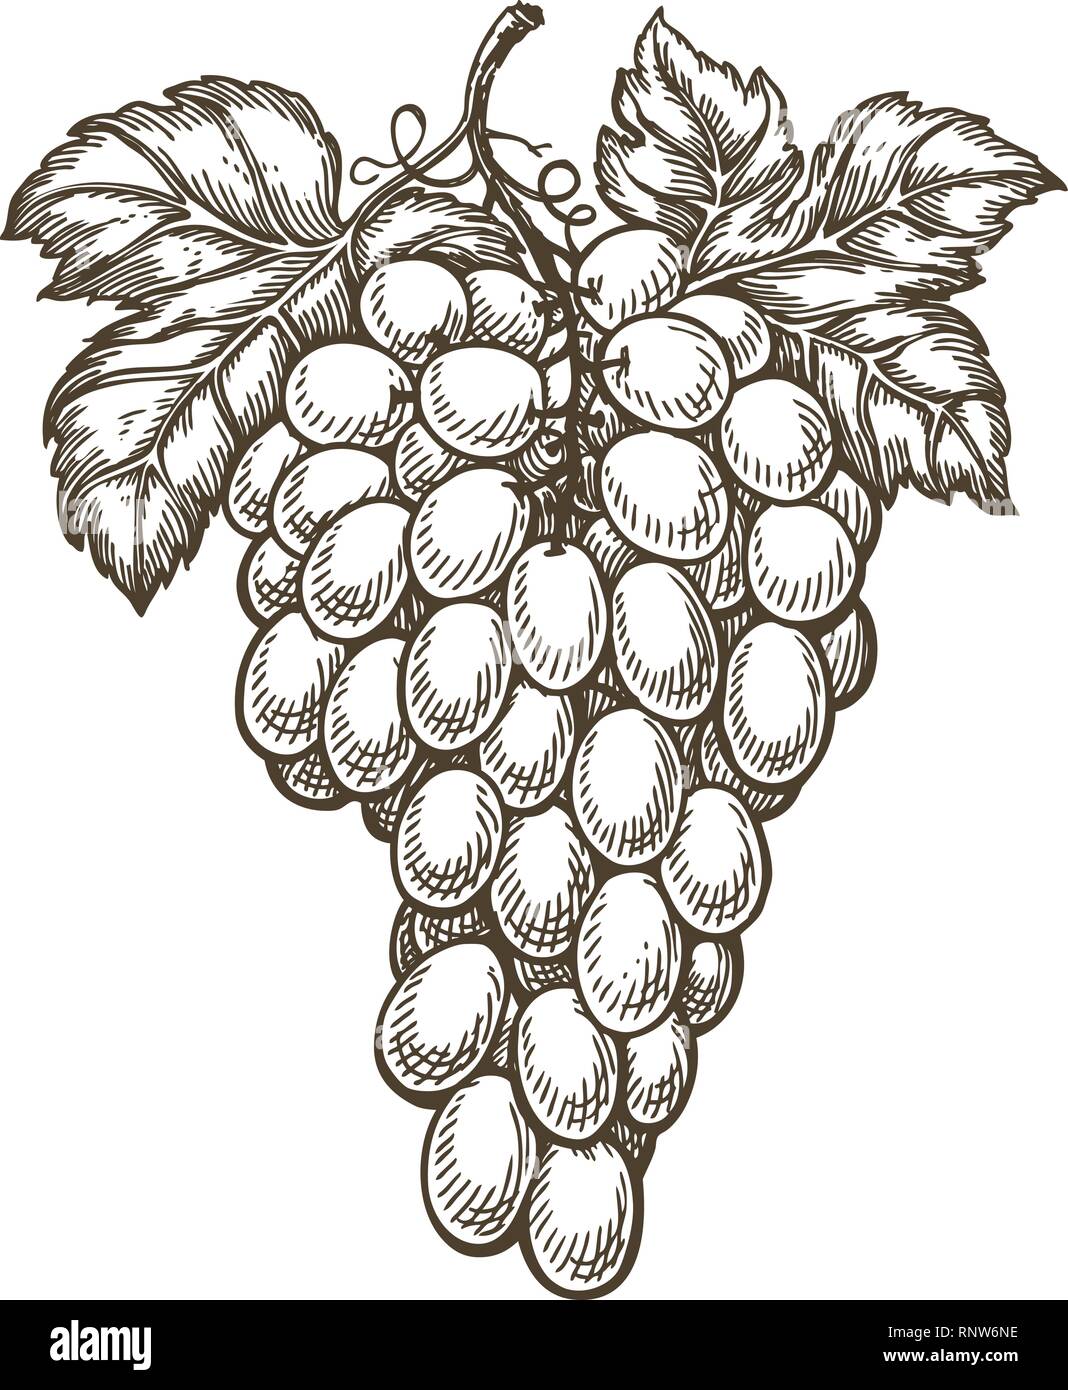 Details more than 81 sketch image of grapes - in.eteachers